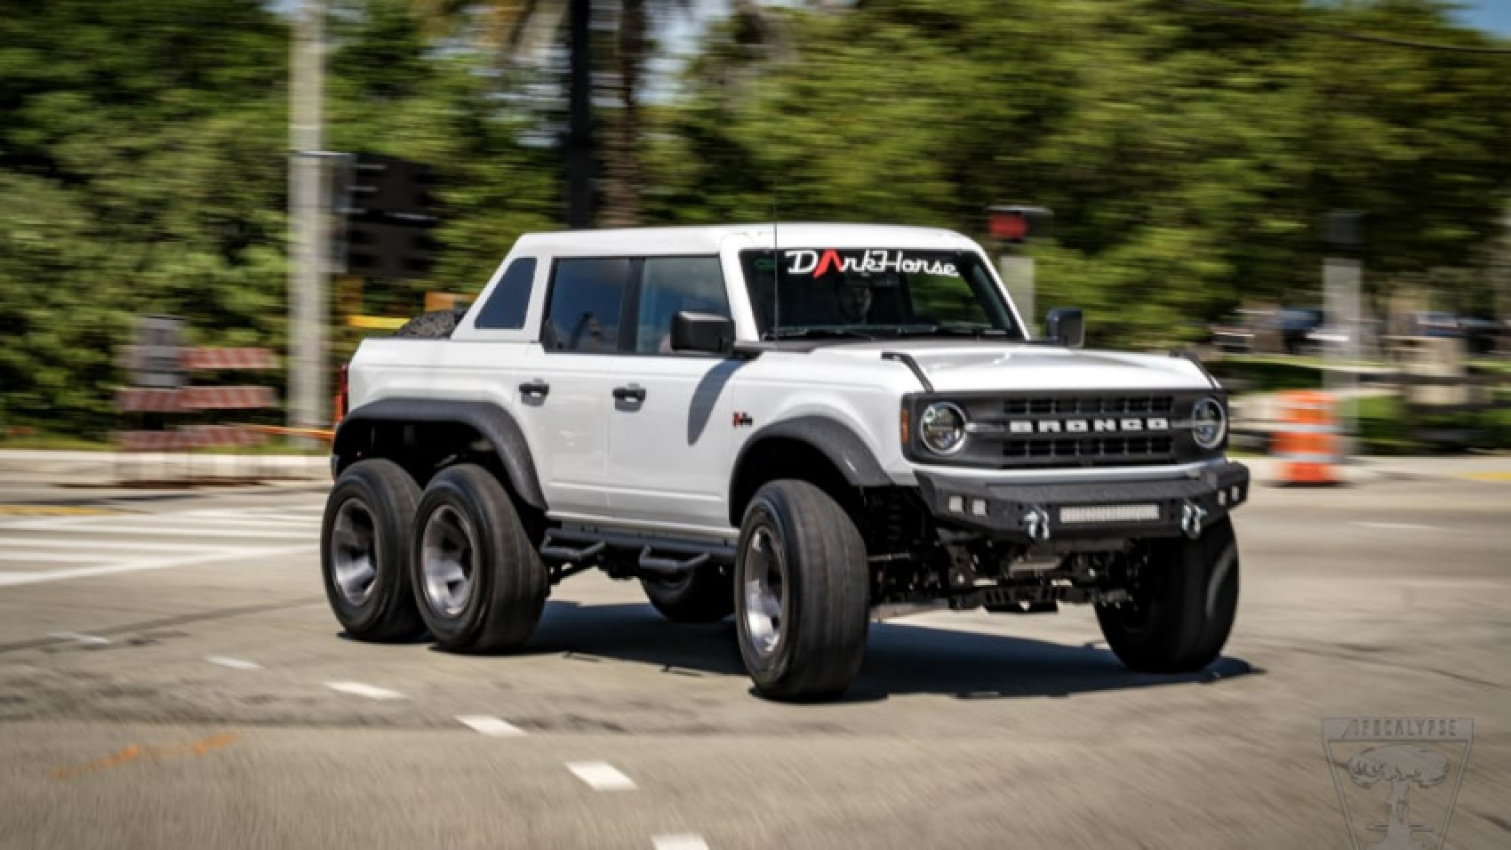 aftermarket, autos, cars, ford, aftermarket, ford bronco, truck, apocalypse dark horse is a ford bronco pickup with 6 wheels and a lift kit